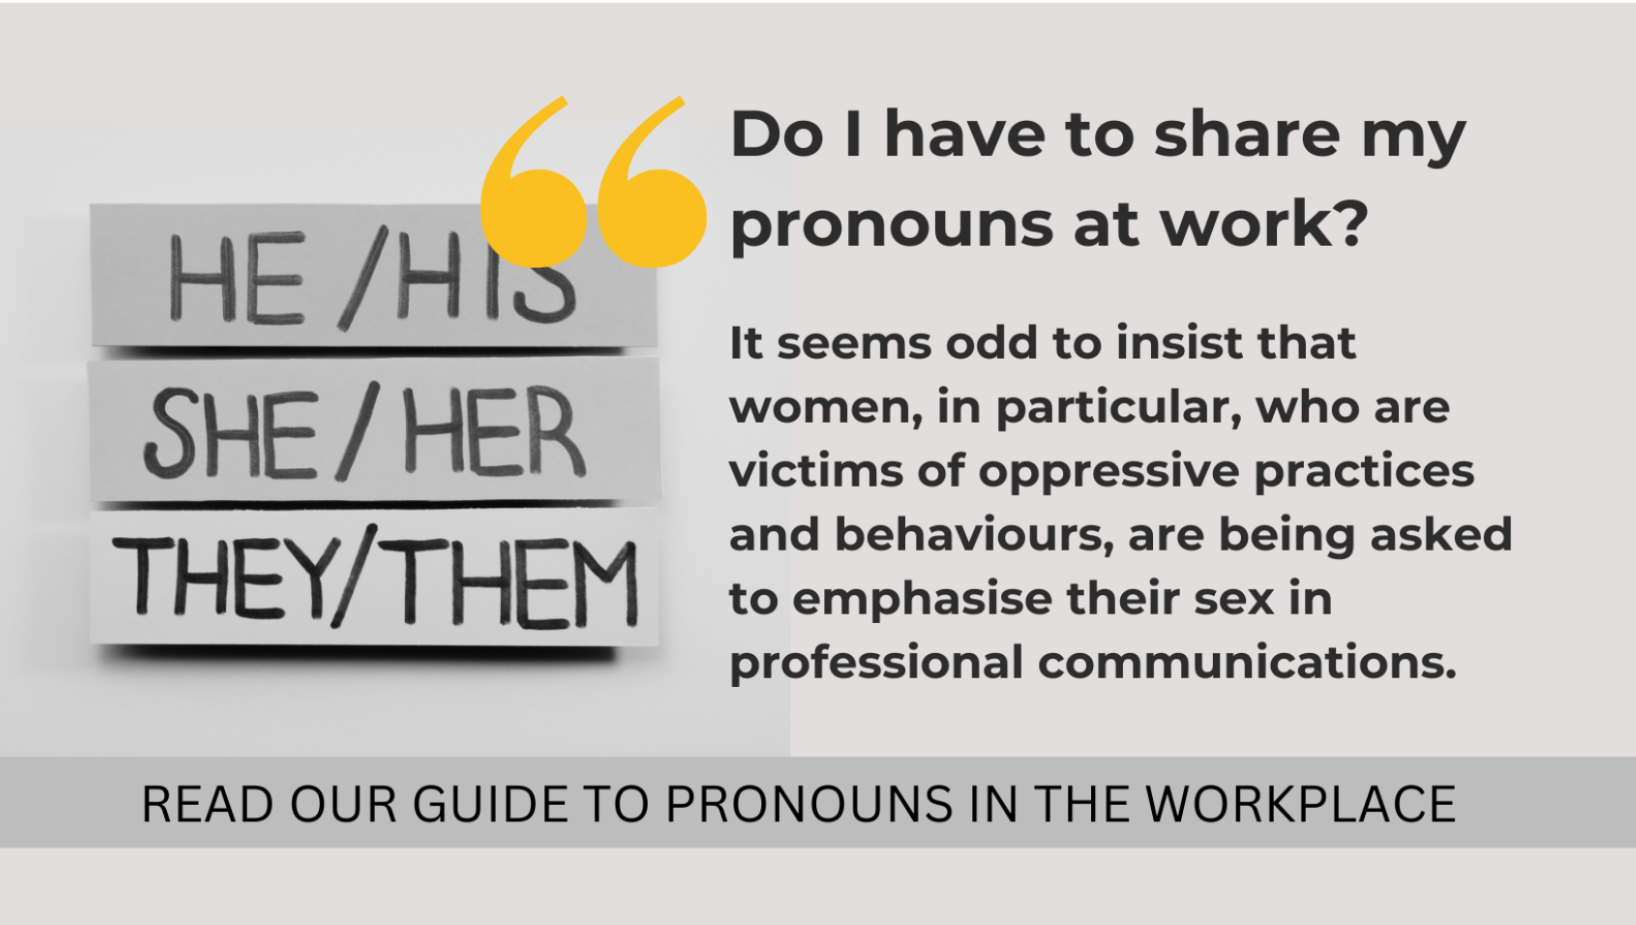 Do I have to share my pronouns at work?